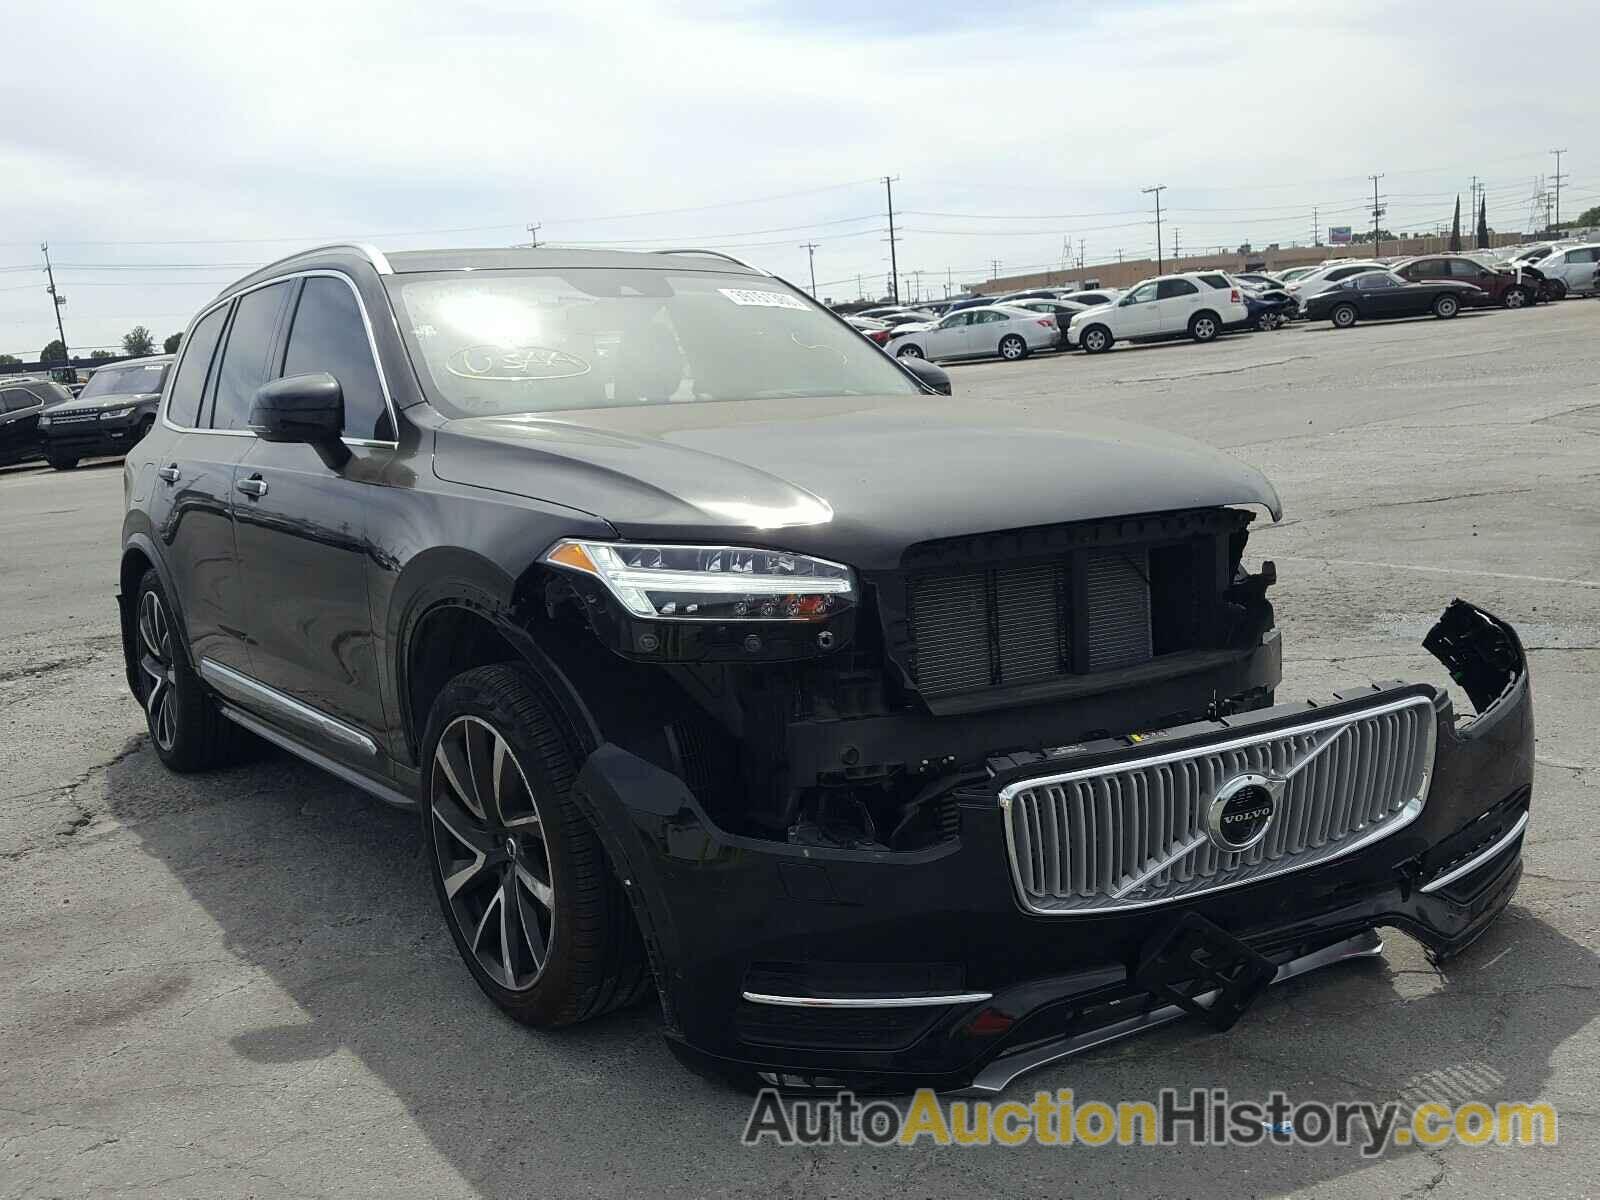 2019 VOLVO XC90 T6 IN T6 INSCRIPTION, YV4A22PL8K1484343